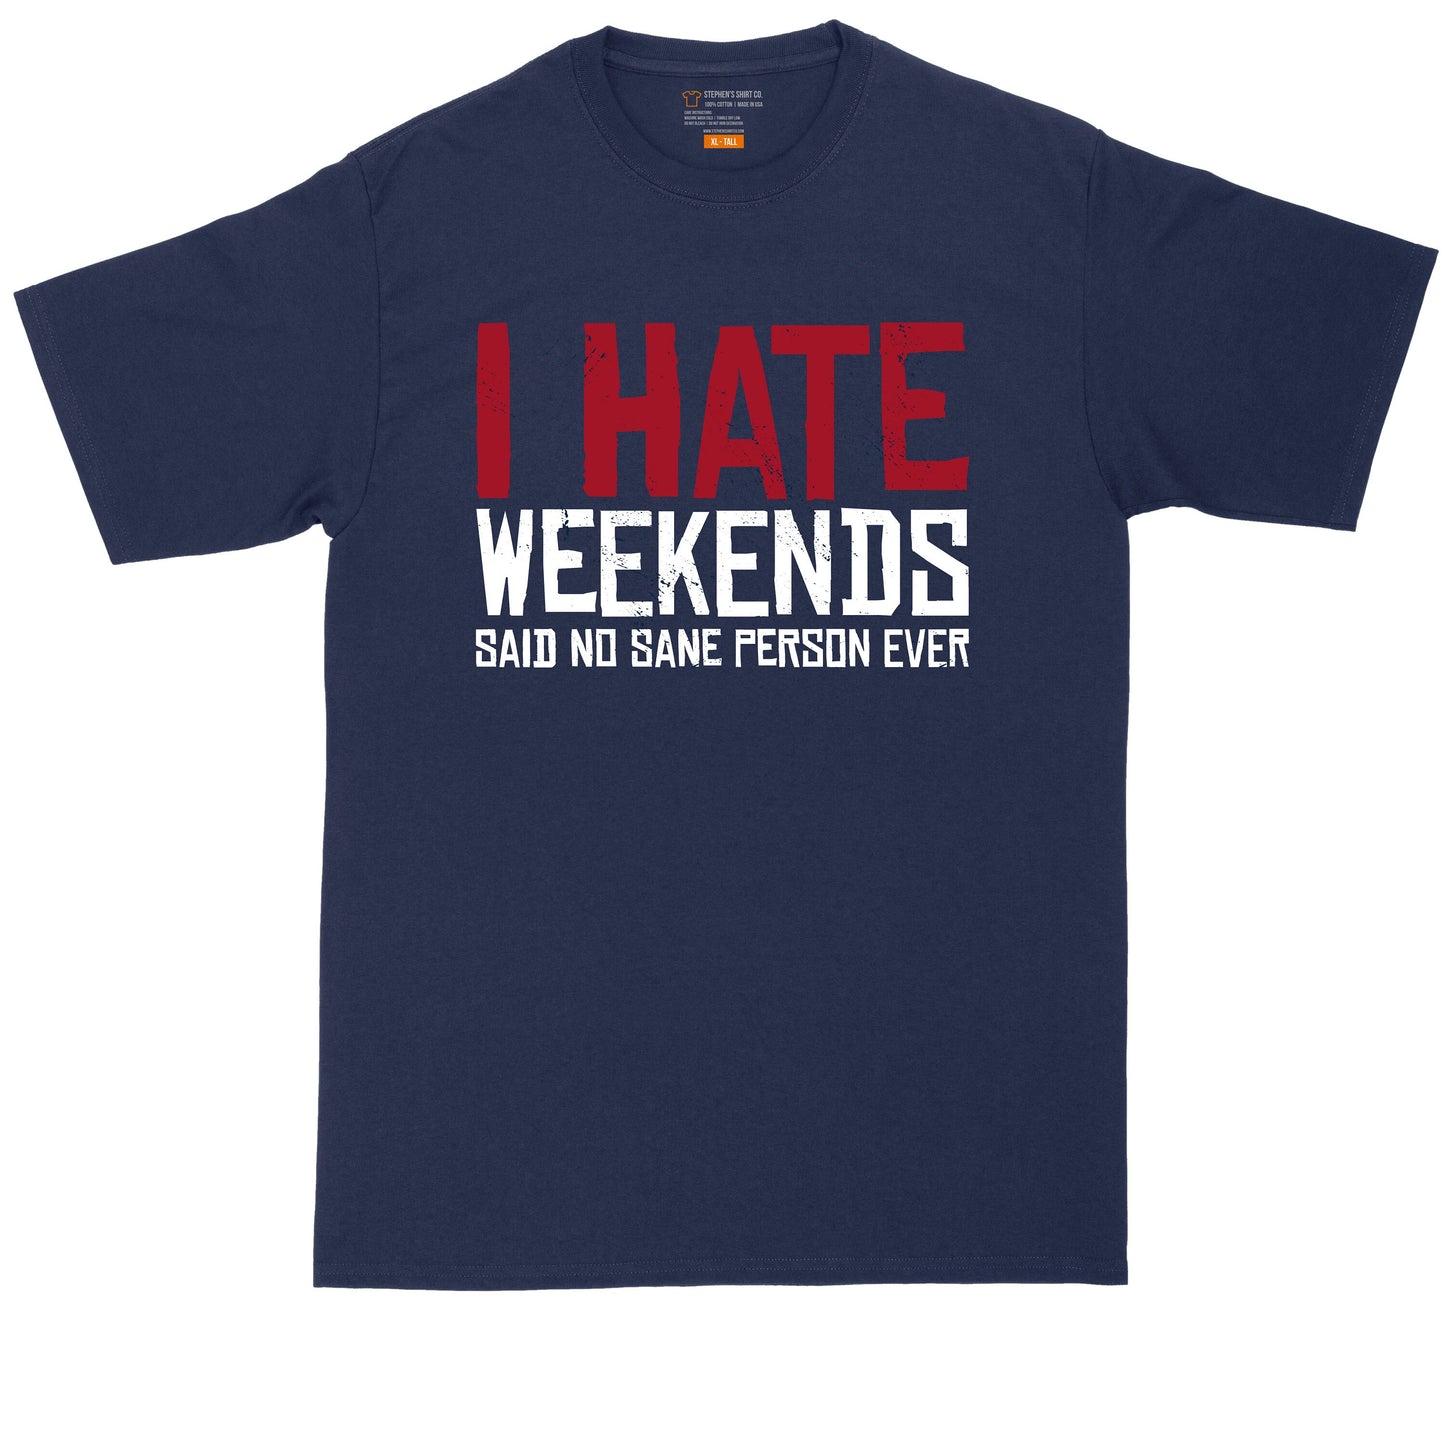 I Hate Weekends Said No Sane Person Ever | Mens Big and Tall T-Shirt | Weekend Shirt | Funny Relaxing Shirt